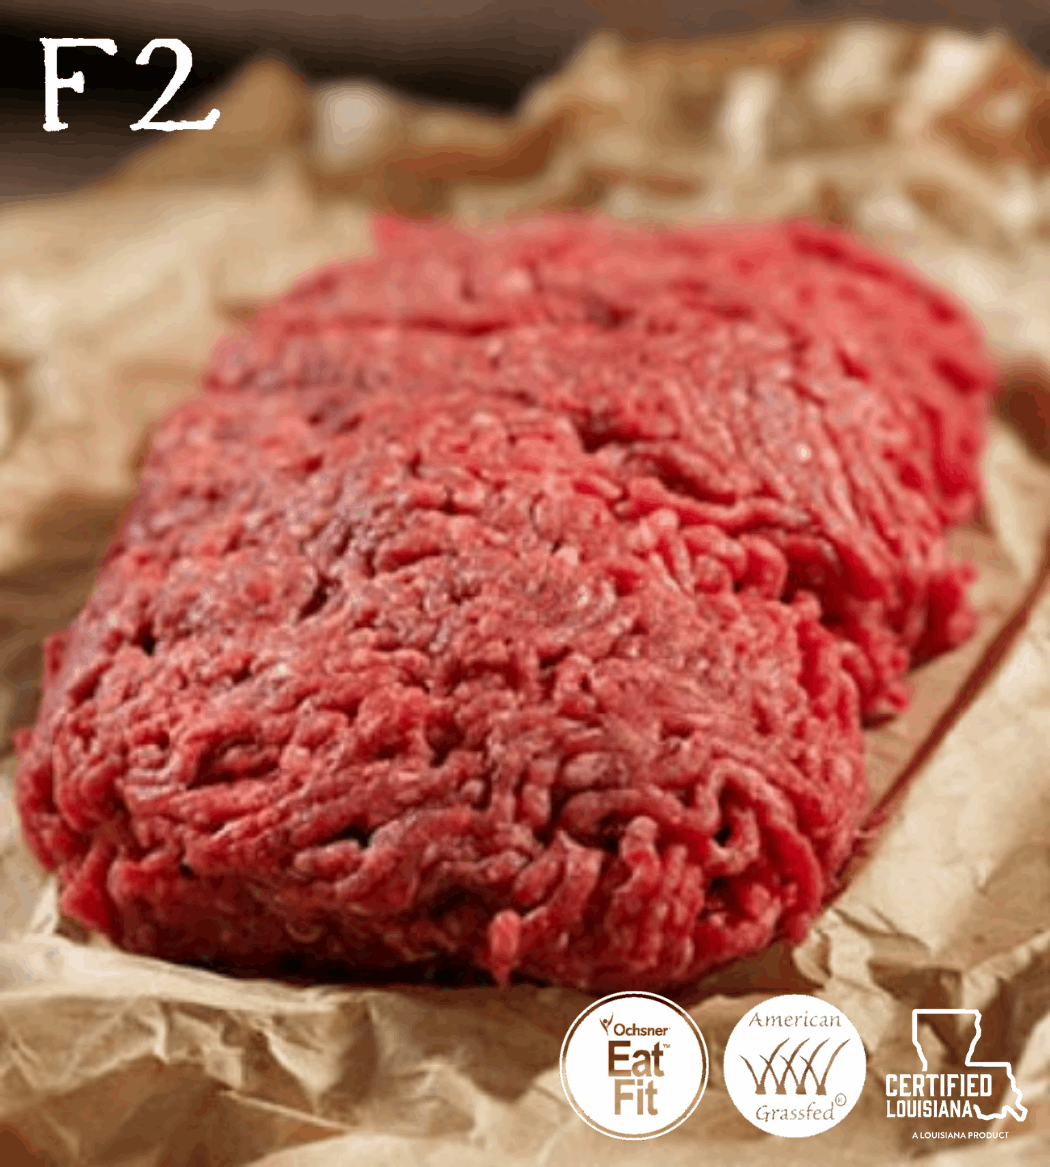 80/20 Ground Beef - WEEKLY SPECIAL! - Gonsoulin Land and Cattle